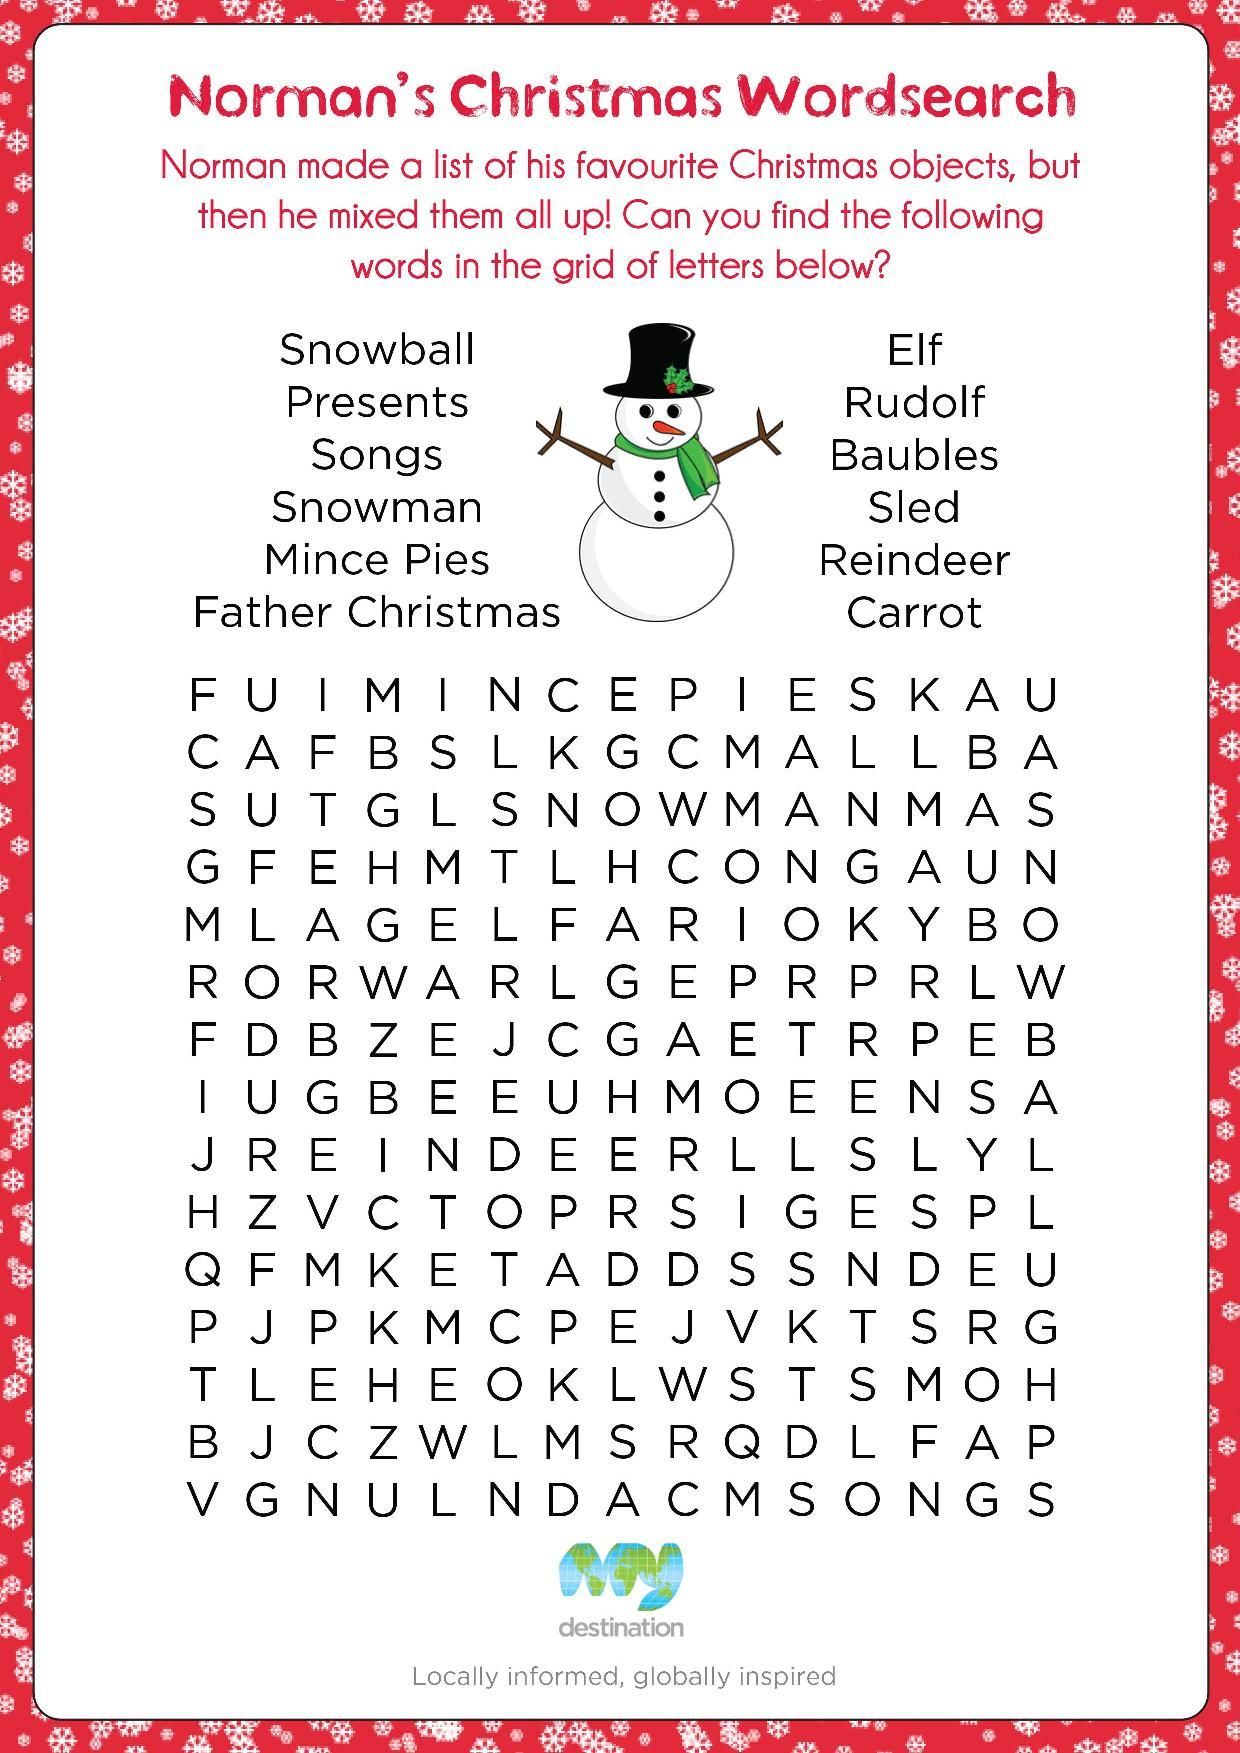 Christmas Wordsearch Download This Puzzle For Free At The 